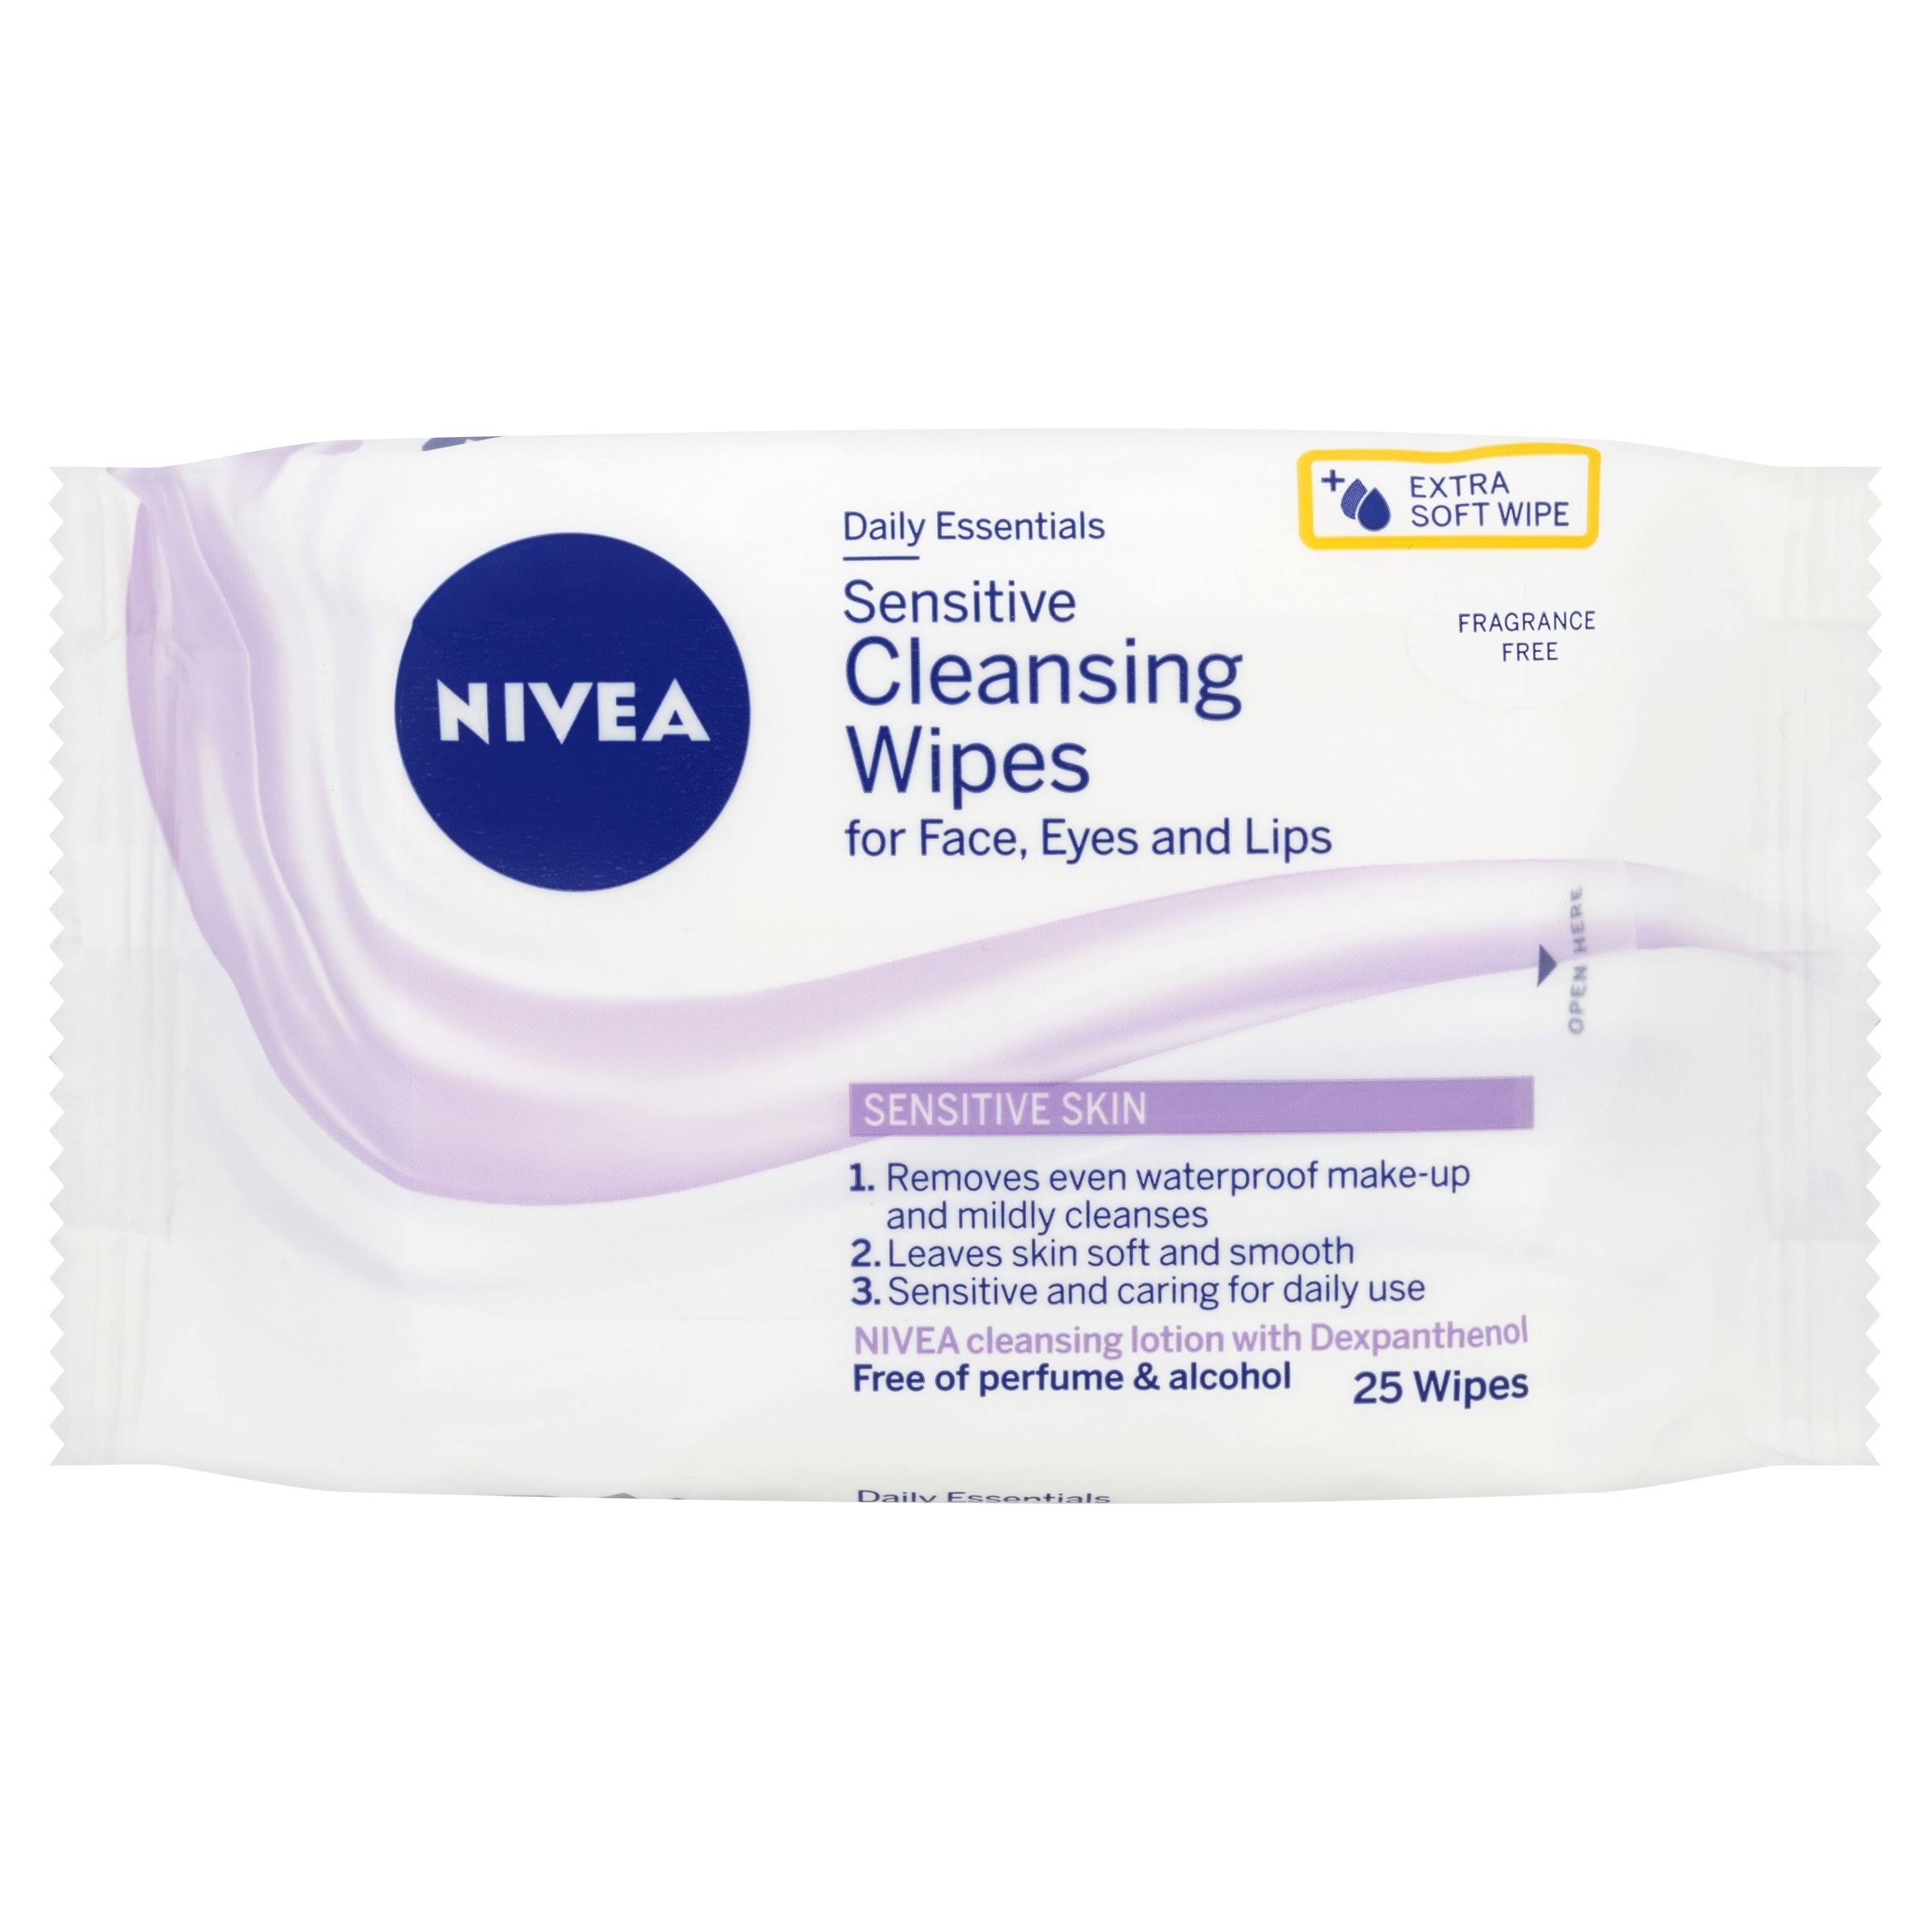 Nivea Daily Essentials Cleansing Wipes - Sensitive, 25 Wipes